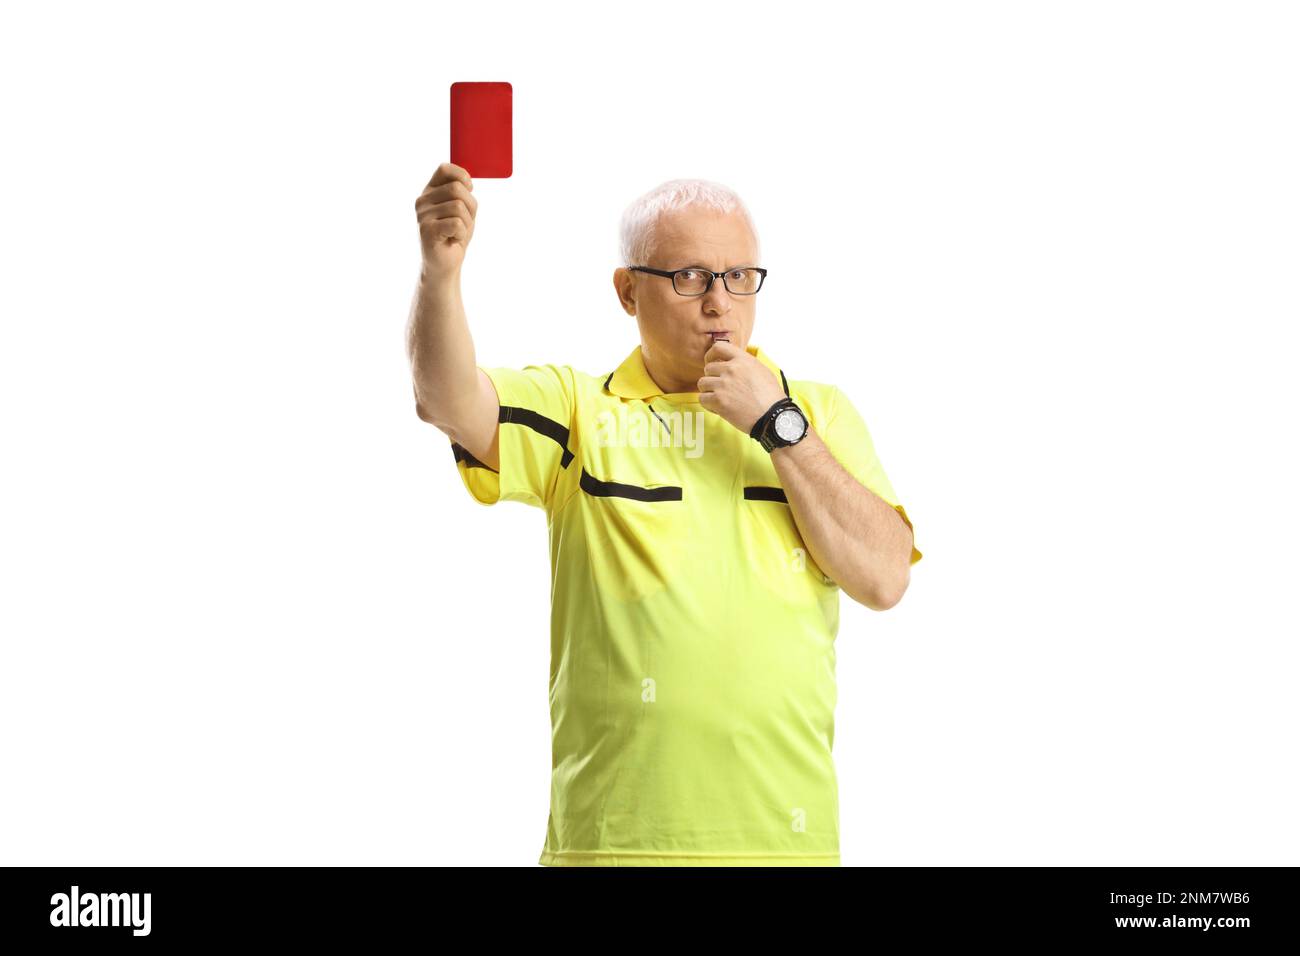 Football referee with a whistle showing a red card isolated on white background Stock Photo